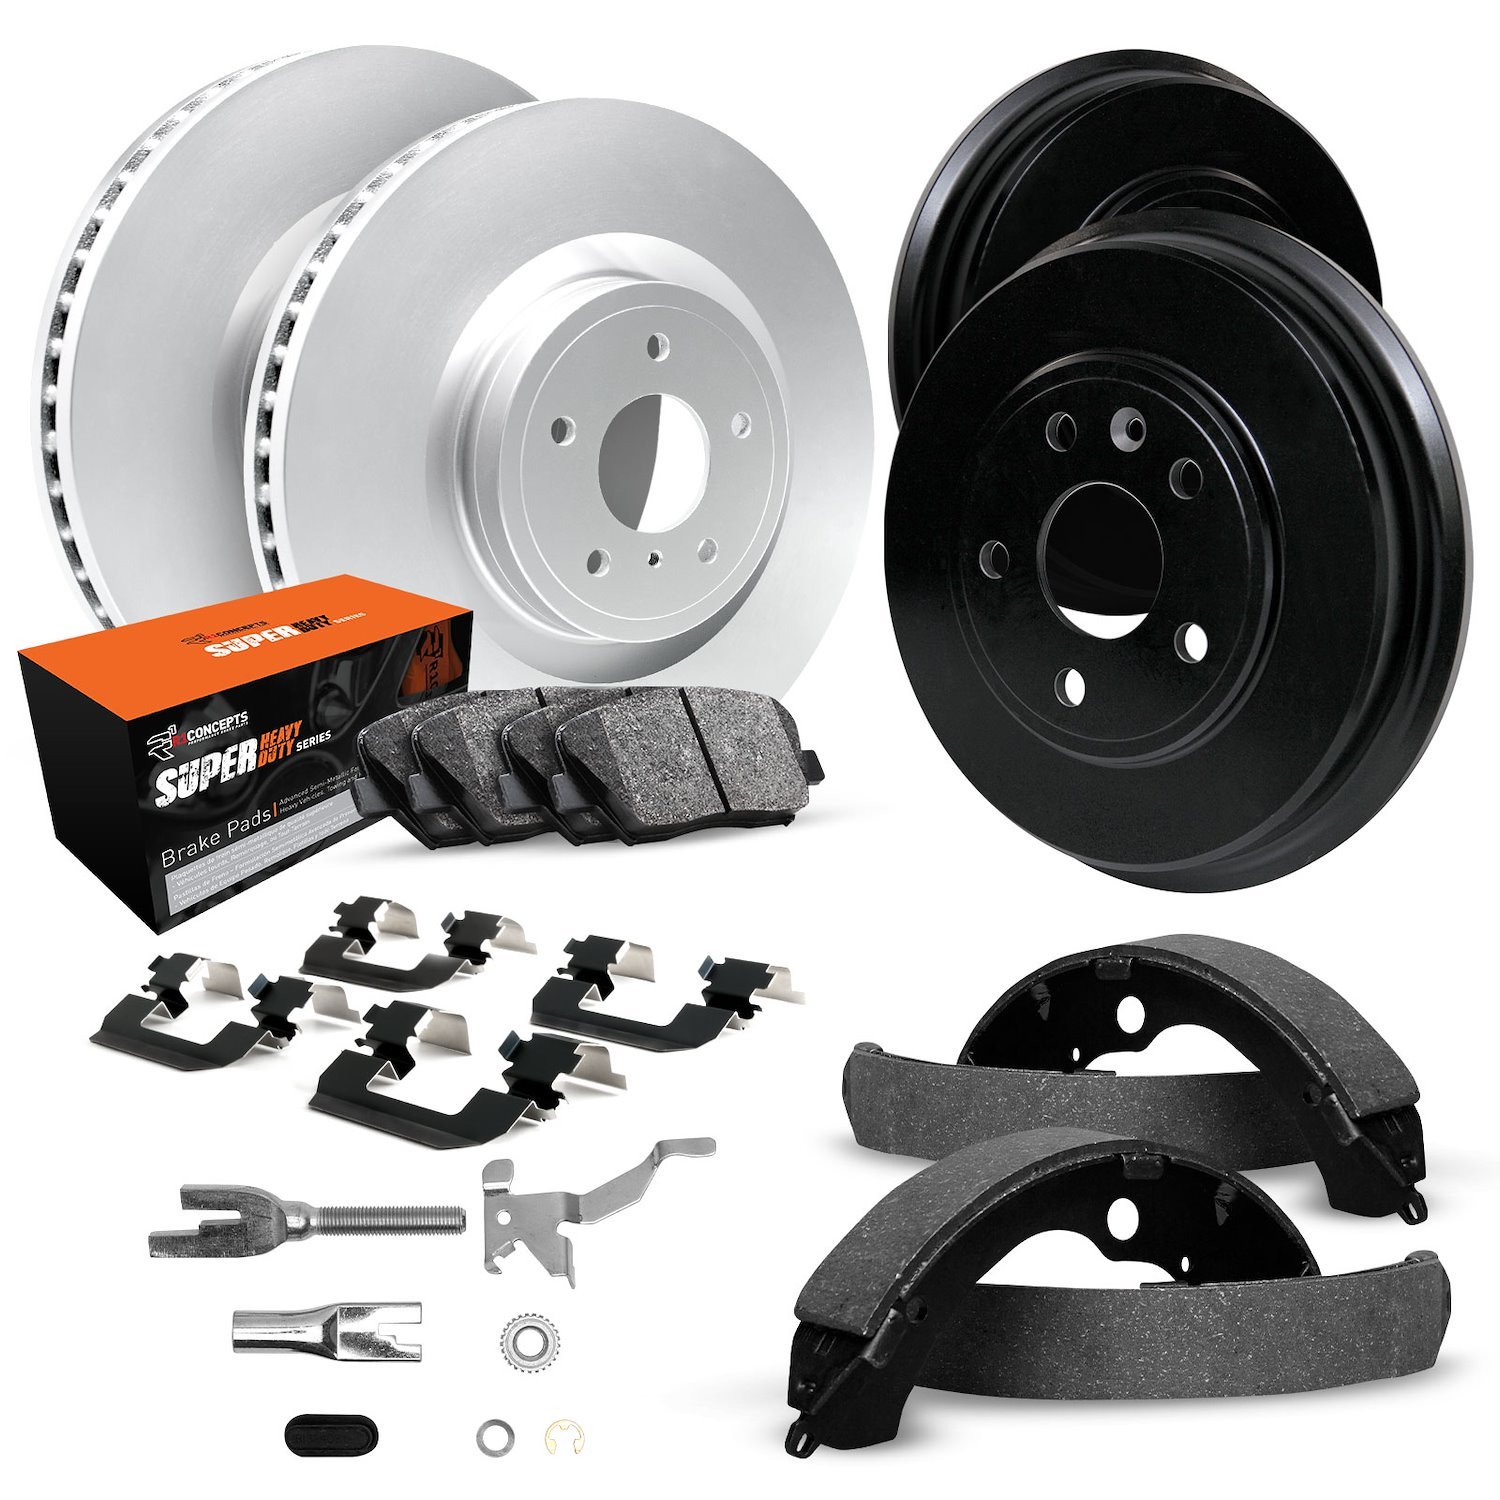 GEO-Carbon Brake Rotor & Drum Set w/Super-Duty Pads, Shoes, Hardware/Adjusters, 1975-1975 GM, Position: Front & Rear